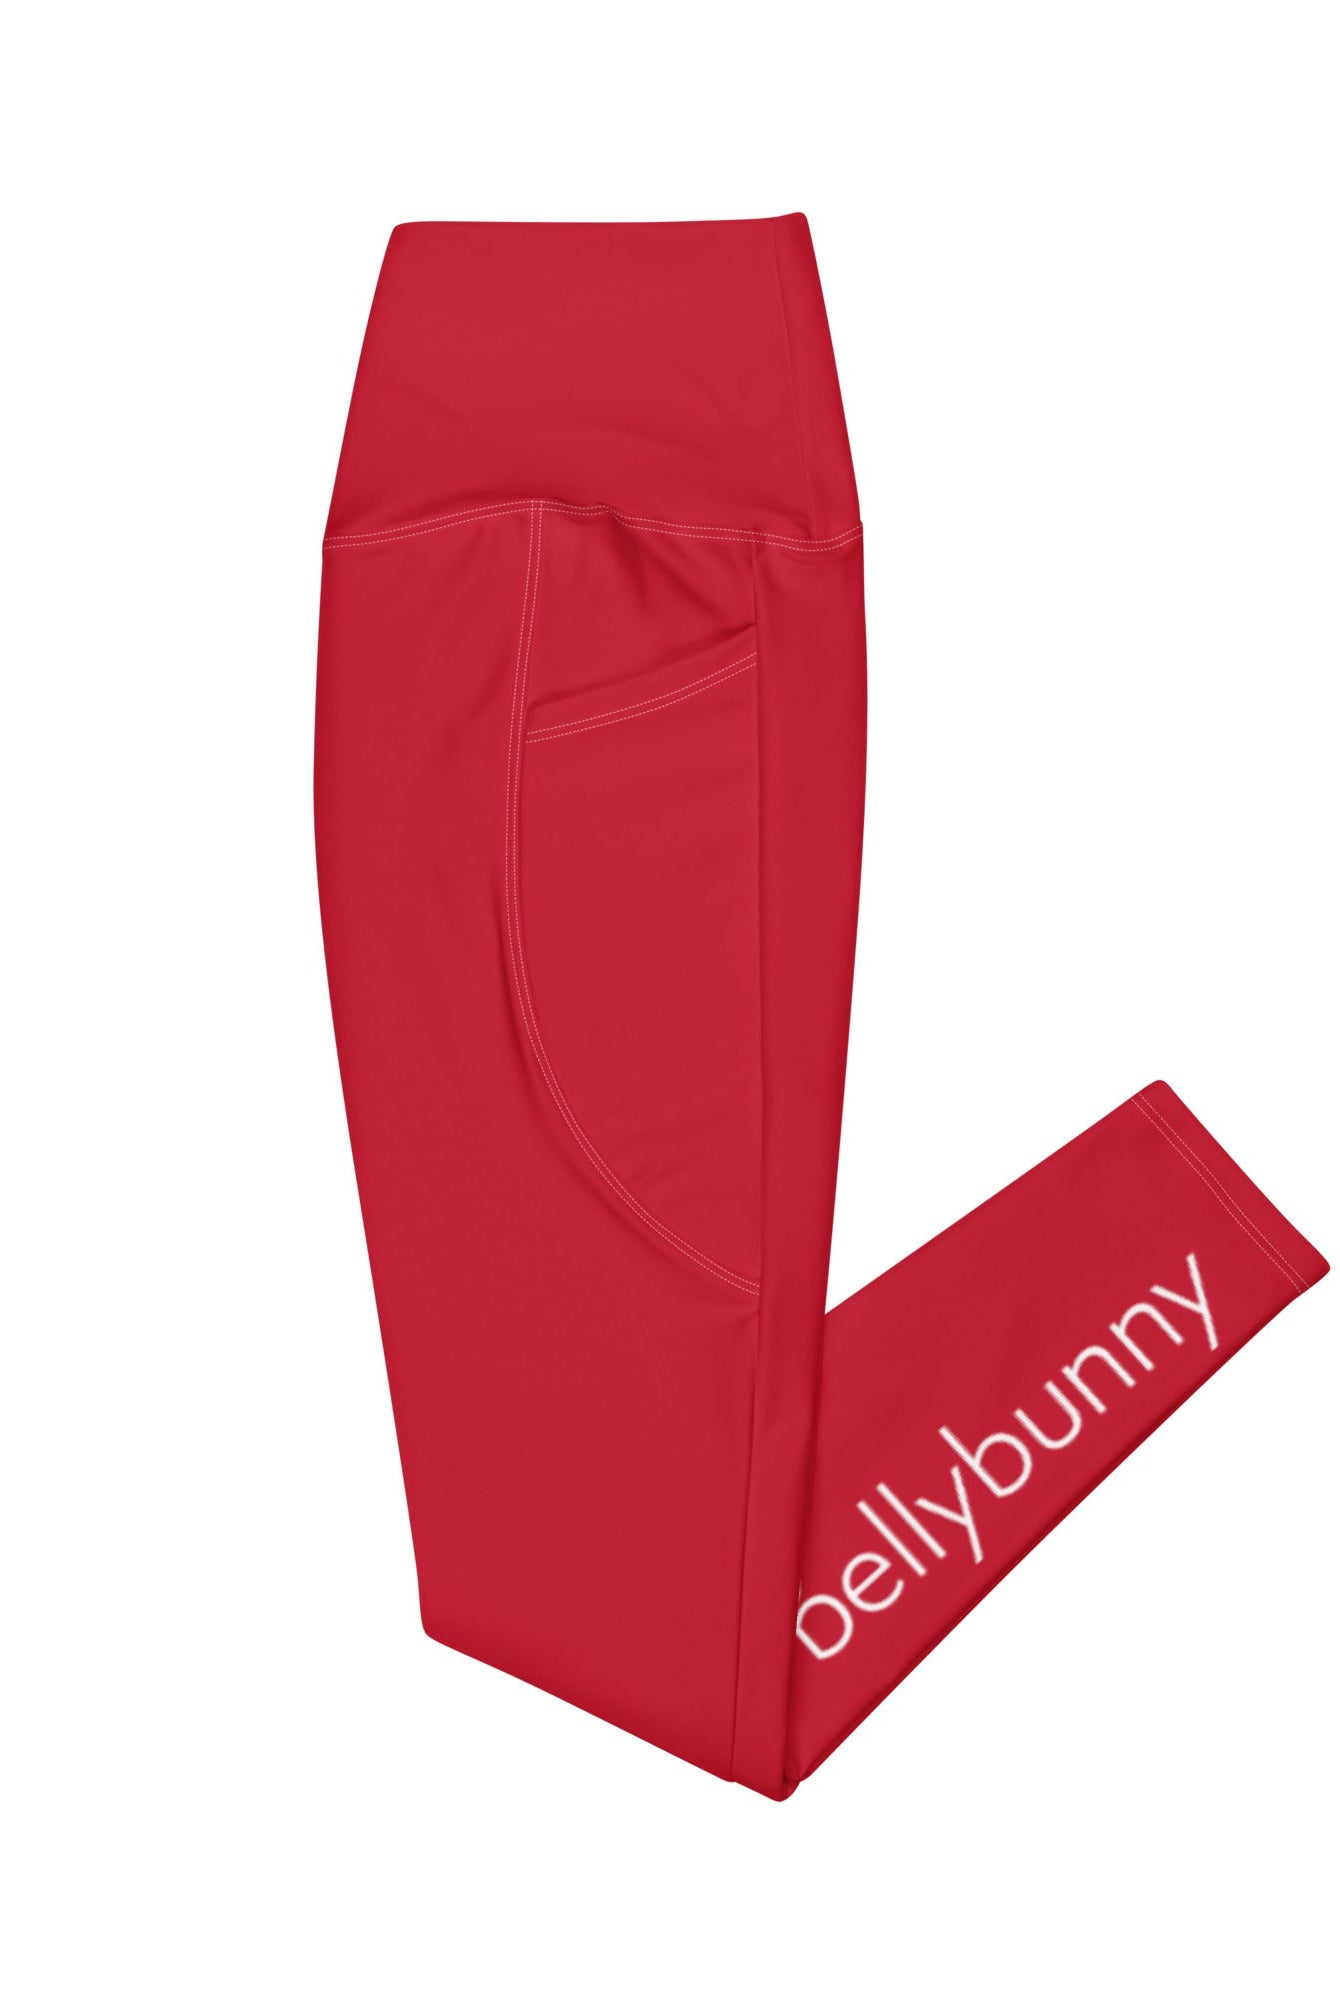 Bellybunny-Women's Classic Leggings-Red with White Logo